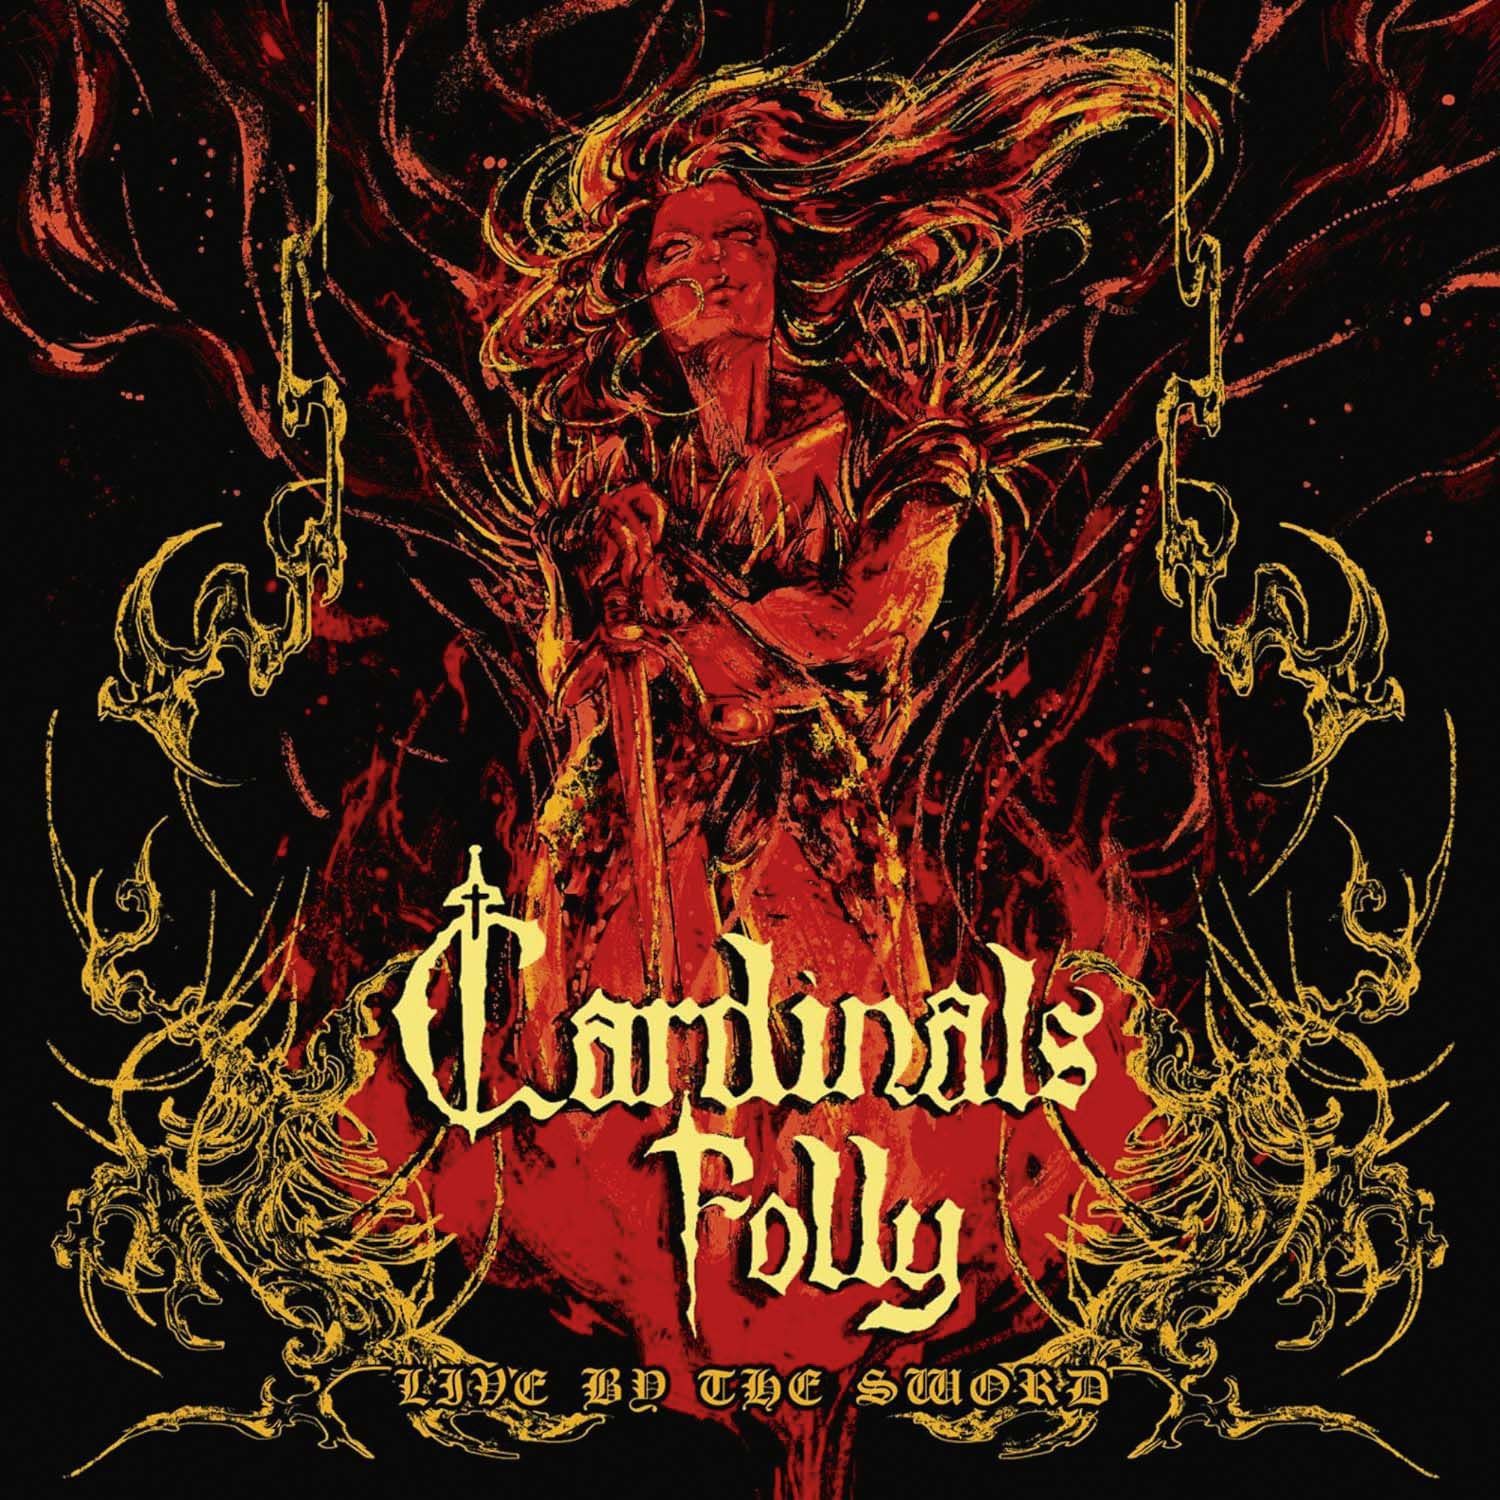 Cardinals Folly - Live By The Sword